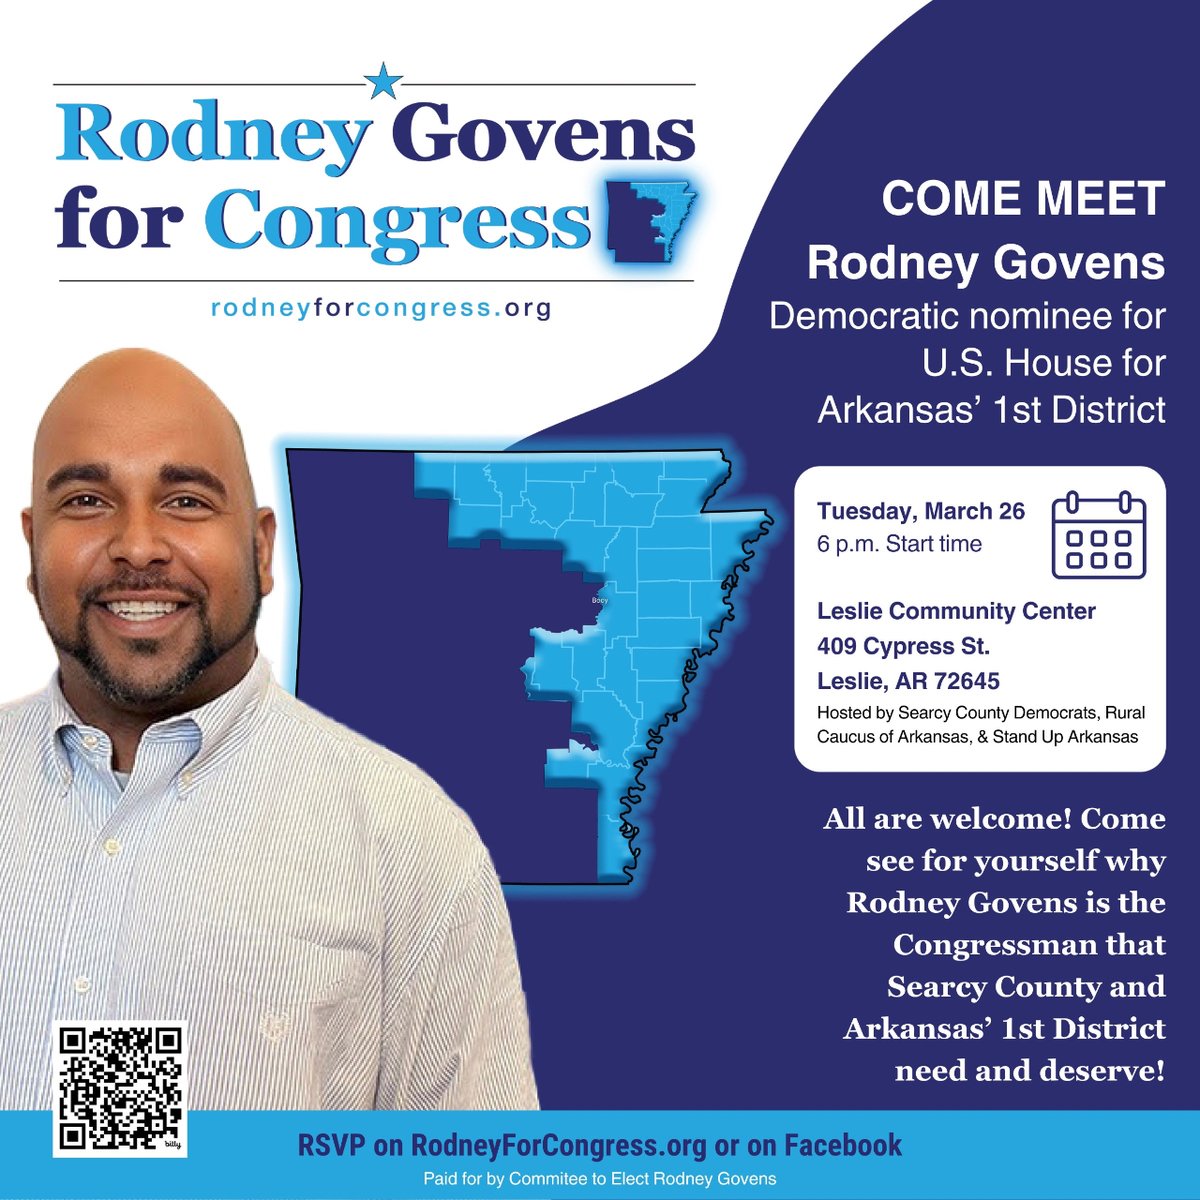 I’m excited to be in Leslie this evening to meet Searcy County voters, answer questions, & share my vision for bringing responsive, accessible, impactful representation Arkansas’ 1st Congressional District! #arkansas #arpx #elections2024 #rodneyforcongress #ridingwithrodney